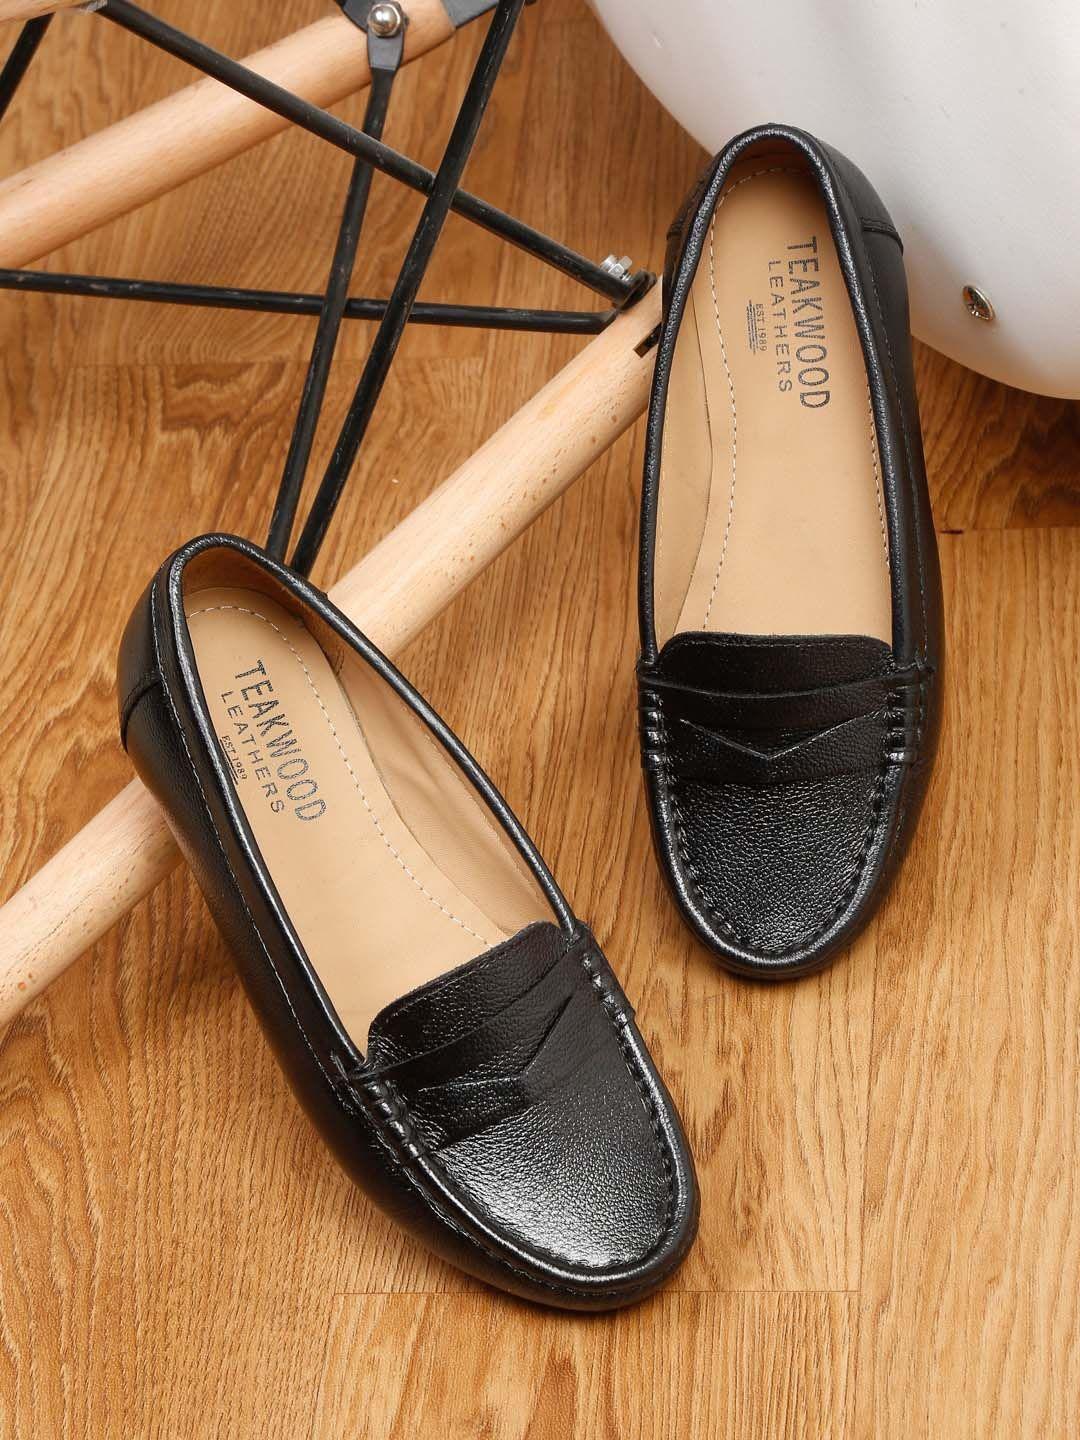 teakwood leathers women textured leather loafers casual shoes